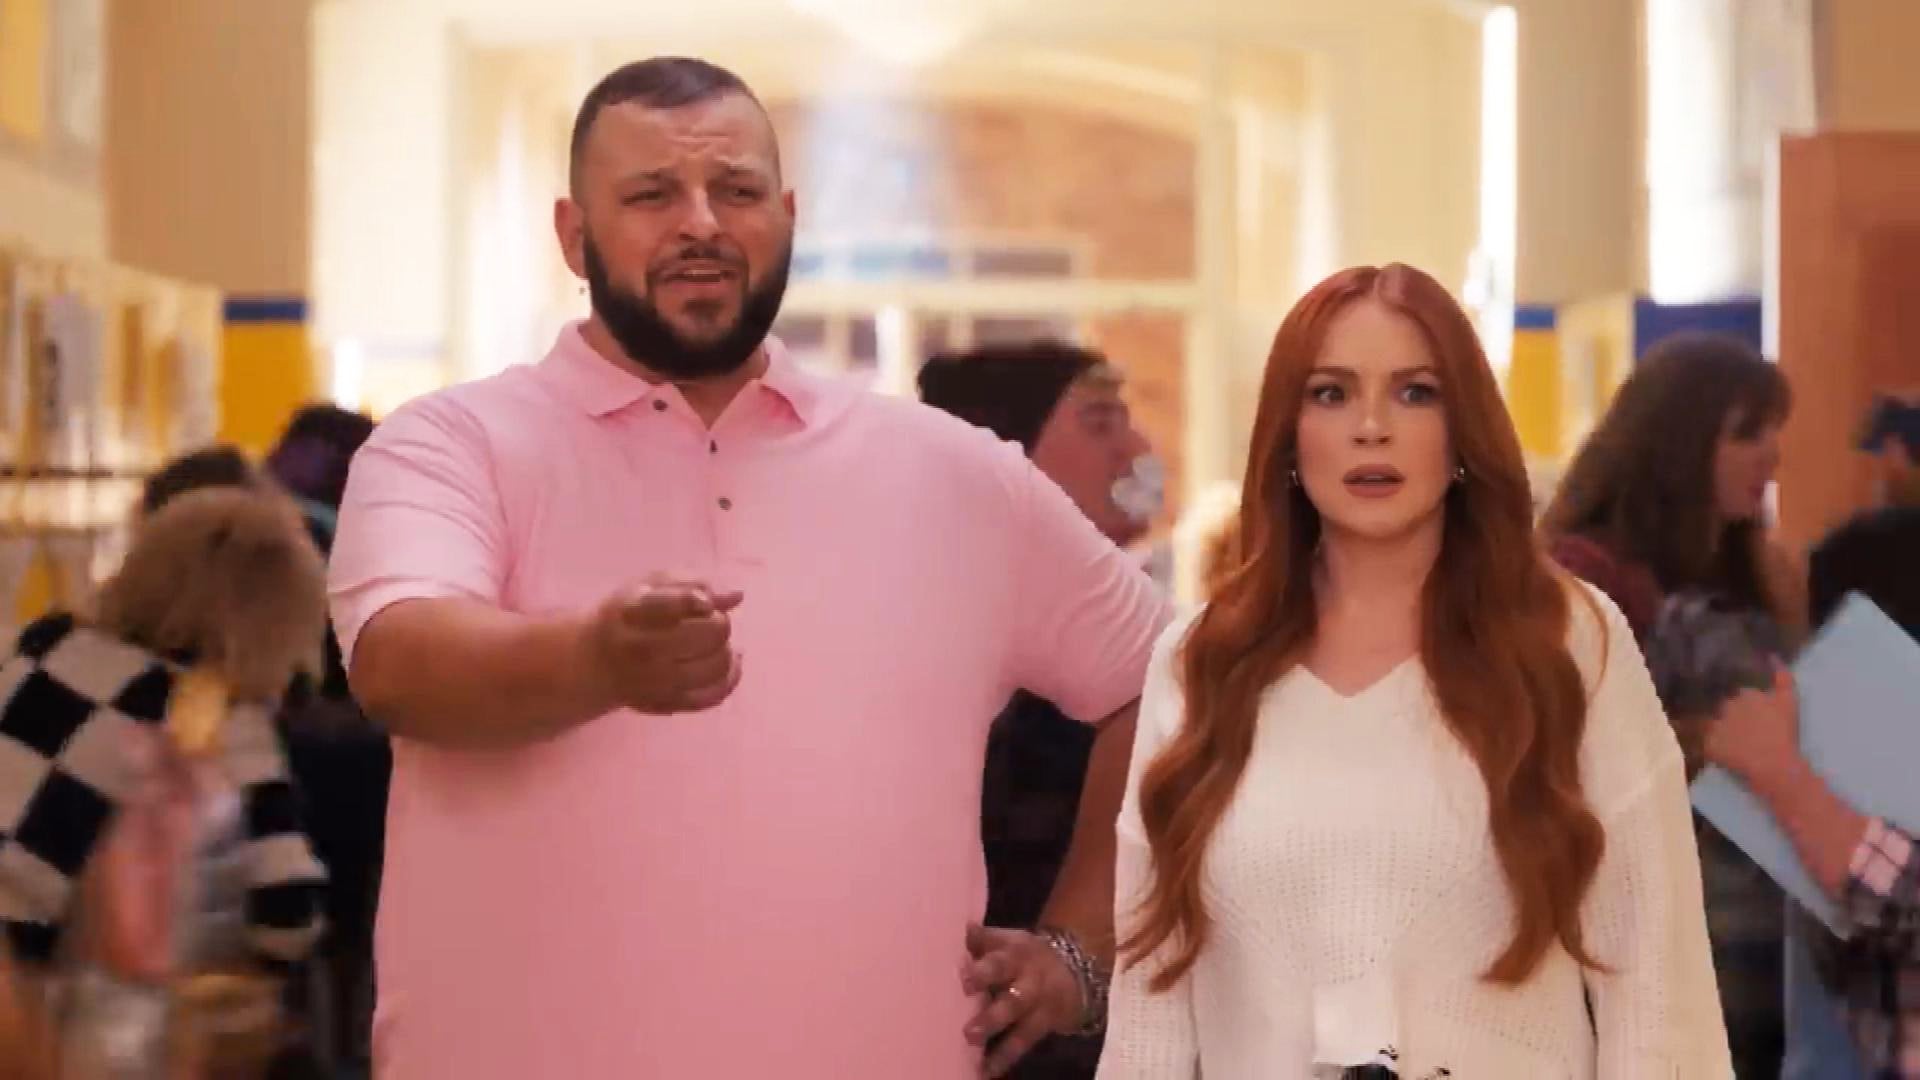 'Mean Girls': Watch Lindsay Lohan and Daniel Franzese Reenact Iconic Scenes With a Twist!